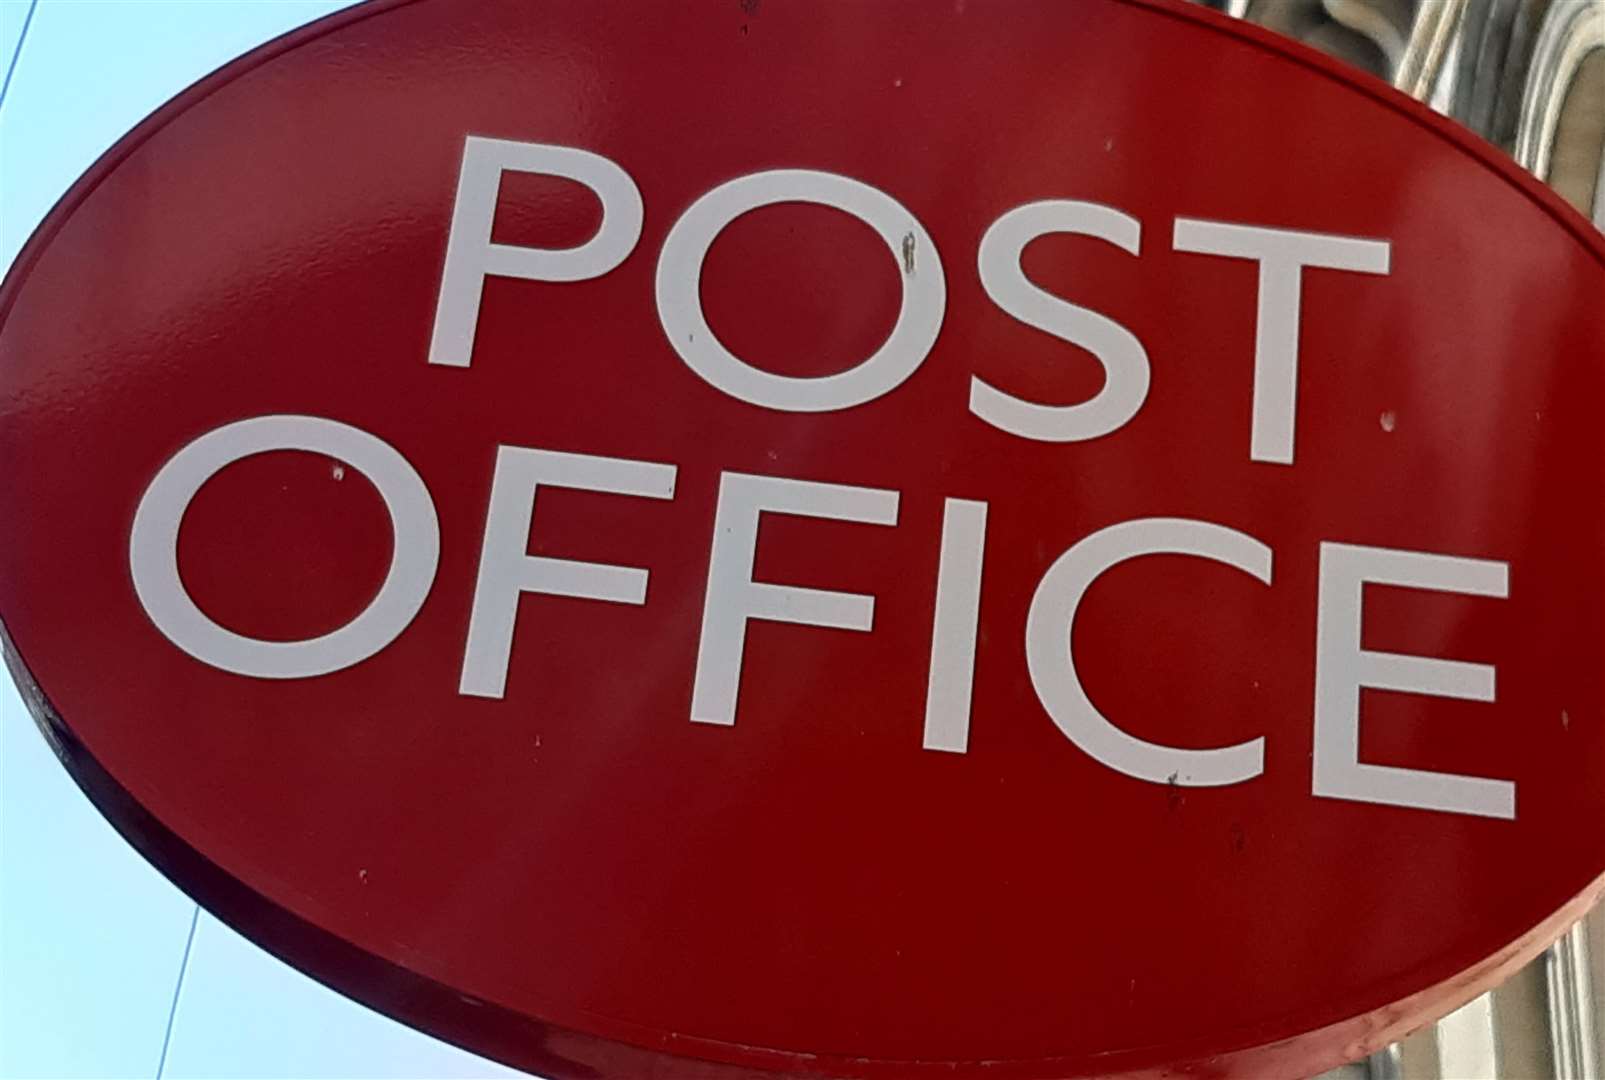 The Post Office once had a seemingly bullet-proof brand...but no more